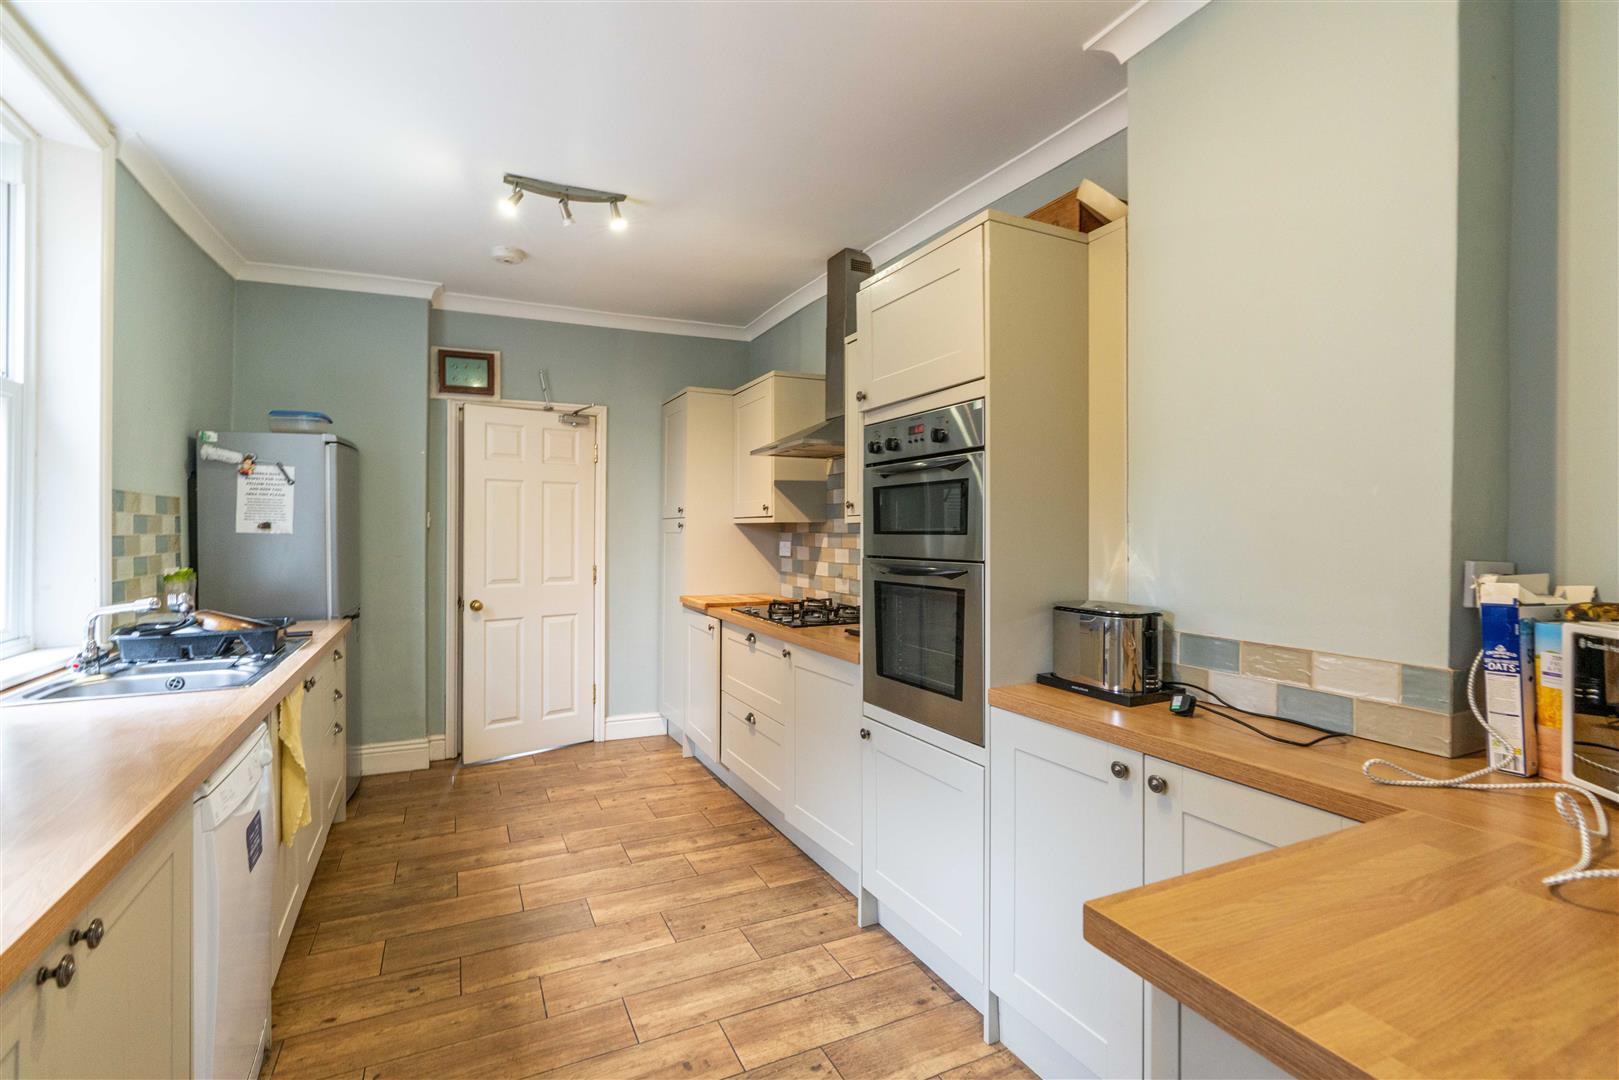 5 bed end of terrace house to rent in Rosebery Crescent, Jesmond - Property Image 1